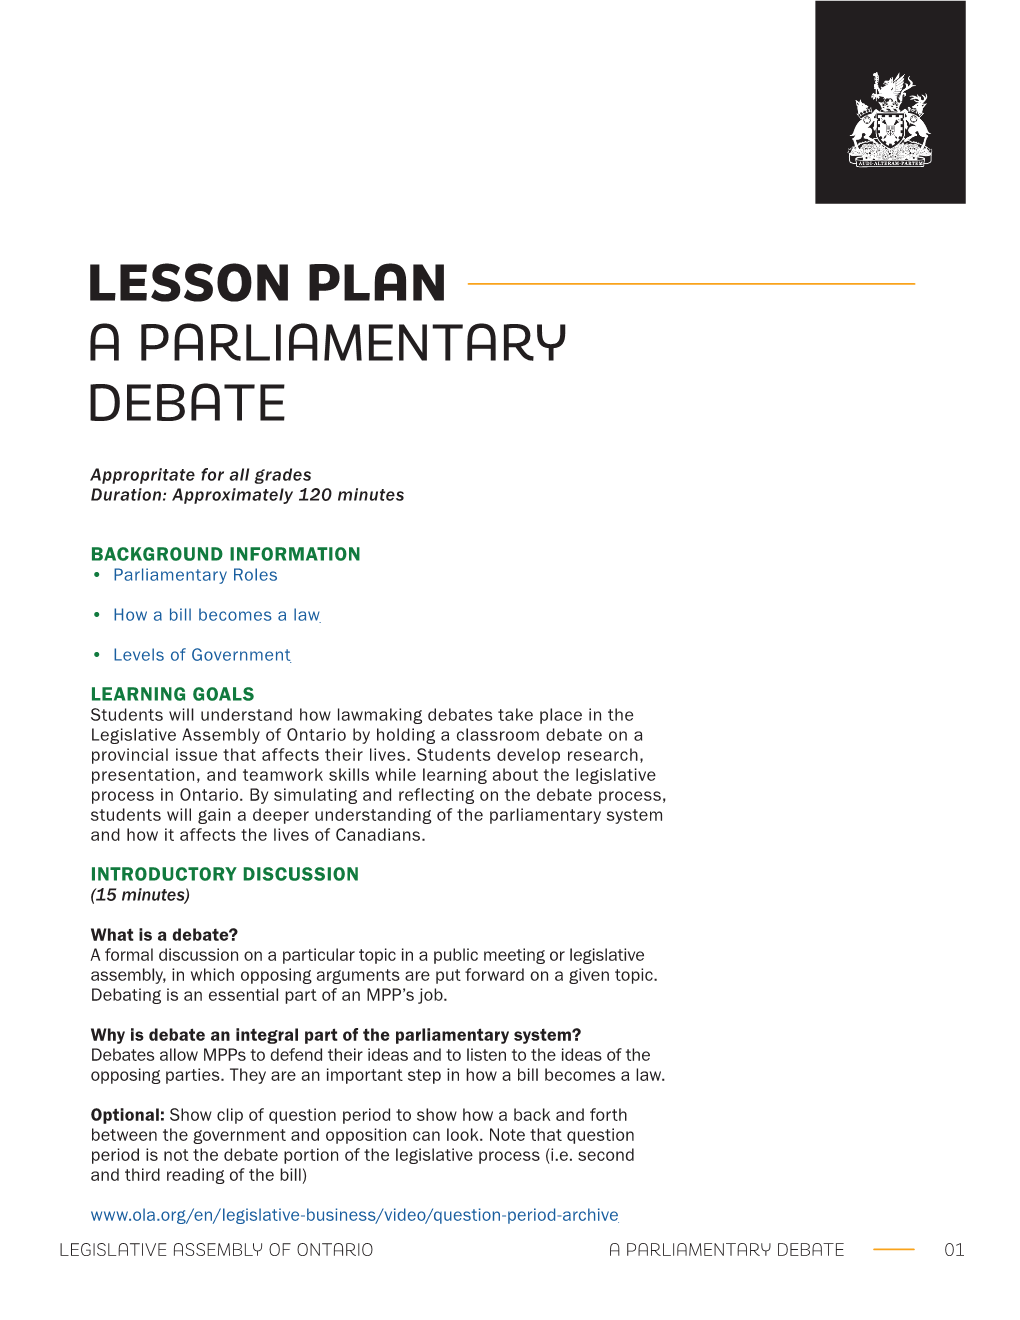 Lesson Plan with Activities: a Parliamentary Debate